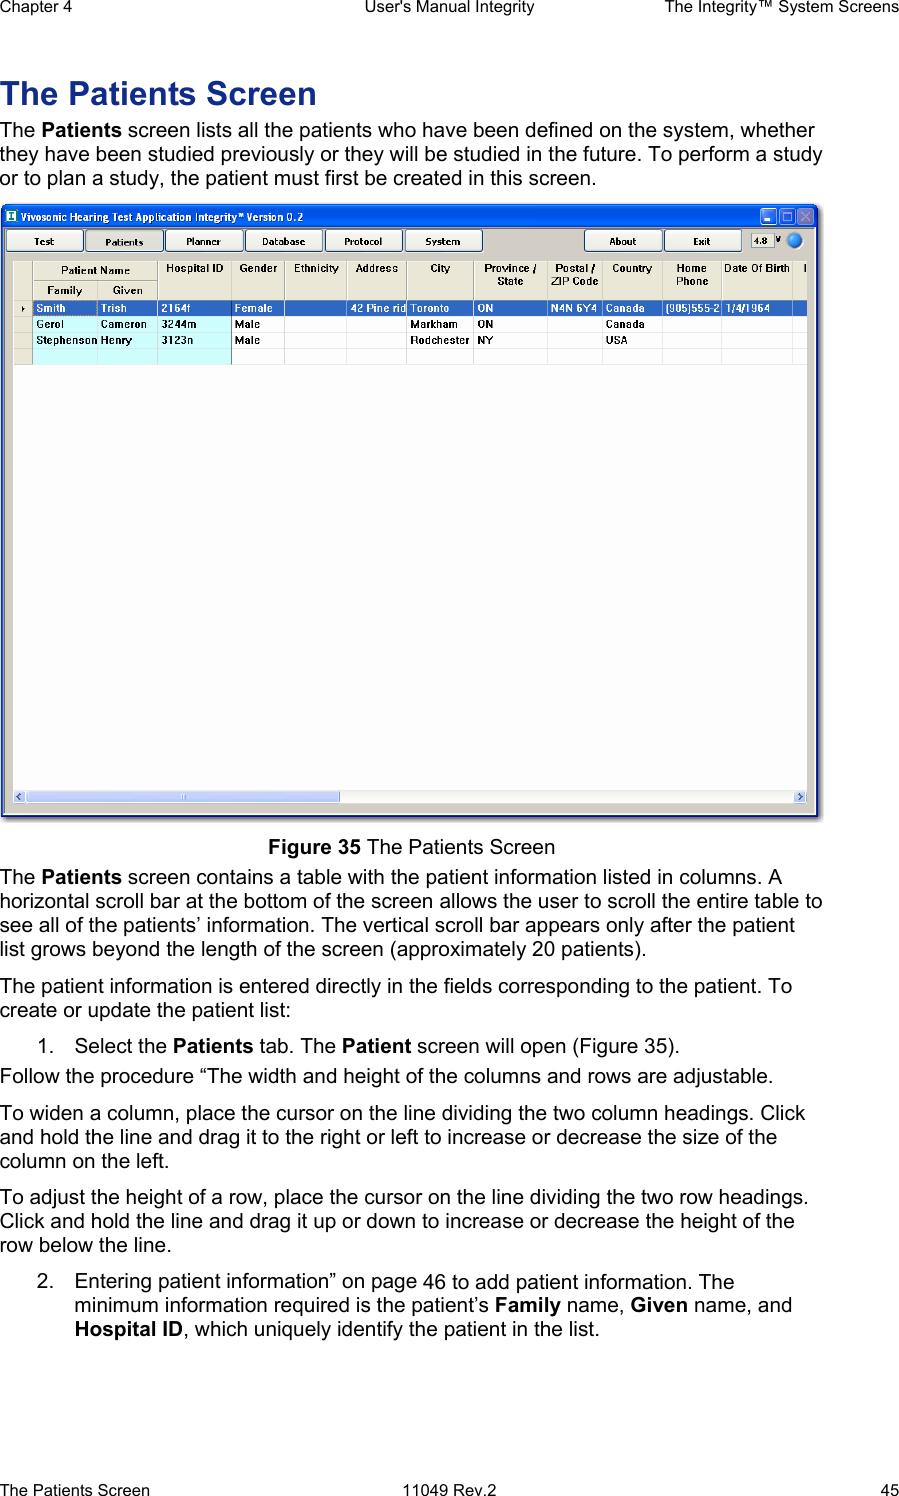 Chapter 4  User&apos;s Manual Integrity  The Integrity™ System Screens The Patients Screen  11049 Rev.2  45 The Patients Screen The Patients screen lists all the patients who have been defined on the system, whether they have been studied previously or they will be studied in the future. To perform a study or to plan a study, the patient must first be created in this screen.  Figure 35 The Patients Screen The Patients screen contains a table with the patient information listed in columns. A horizontal scroll bar at the bottom of the screen allows the user to scroll the entire table to see all of the patients’ information. The vertical scroll bar appears only after the patient list grows beyond the length of the screen (approximately 20 patients). The patient information is entered directly in the fields corresponding to the patient. To create or update the patient list: 1. Select the Patients tab. The Patient screen will open (Figure 35). Follow the procedure “The width and height of the columns and rows are adjustable. To widen a column, place the cursor on the line dividing the two column headings. Click and hold the line and drag it to the right or left to increase or decrease the size of the column on the left. To adjust the height of a row, place the cursor on the line dividing the two row headings. Click and hold the line and drag it up or down to increase or decrease the height of the row below the line.  2.  Entering patient information” on page 46 to add patient information. The minimum information required is the patient’s Family name, Given name, and Hospital ID, which uniquely identify the patient in the list. 